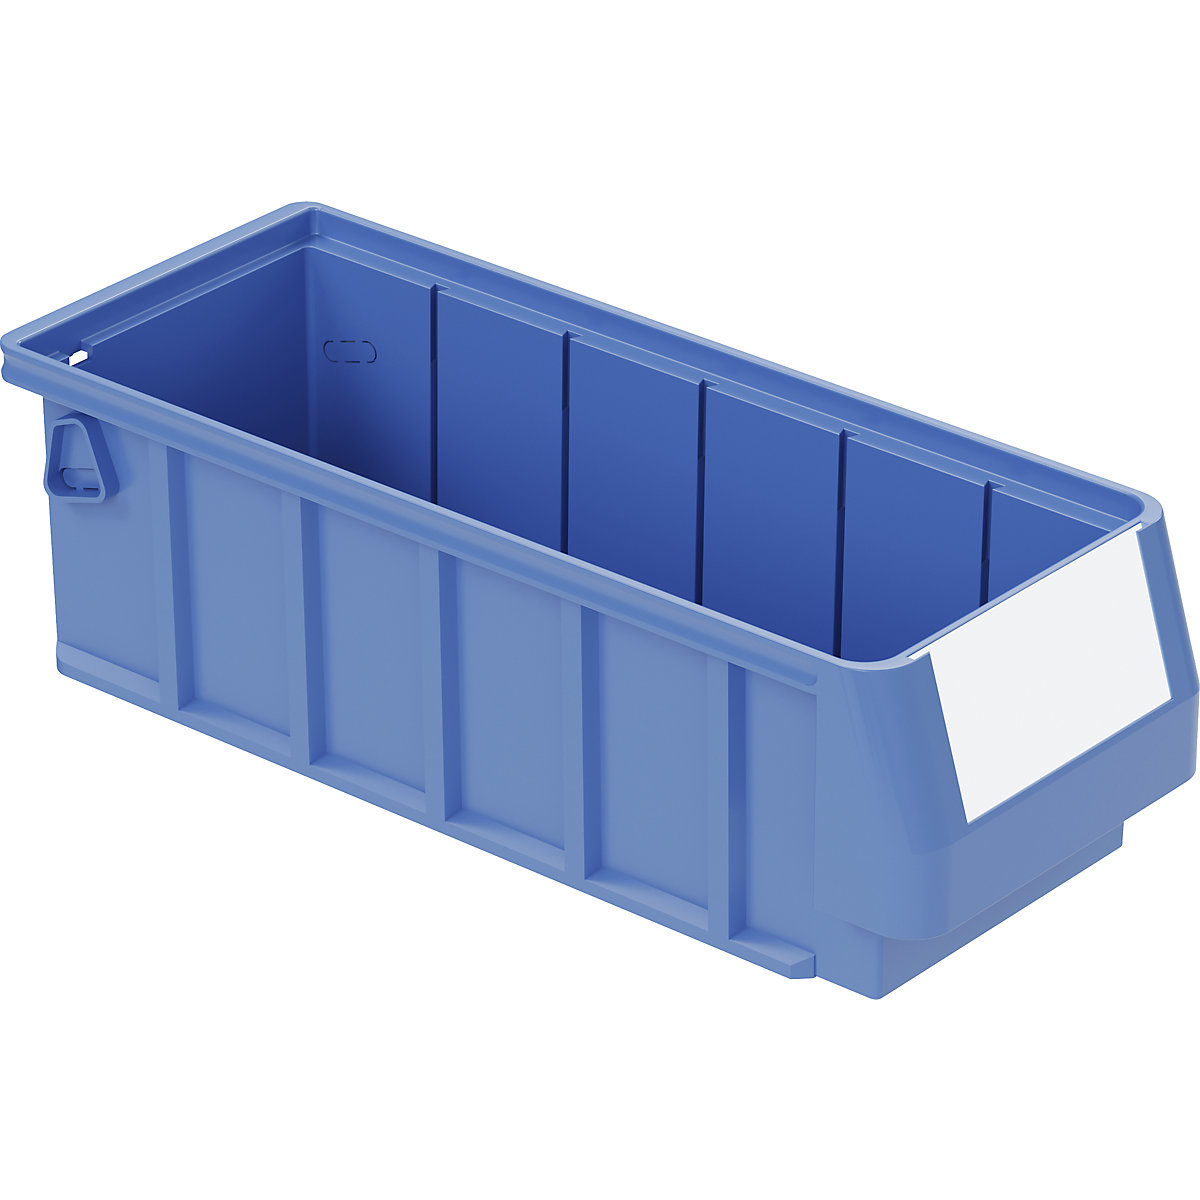 Shelf bin – BITO, made of PP, LxWxH 300 x 117 x 90 mm, pack of 16-17